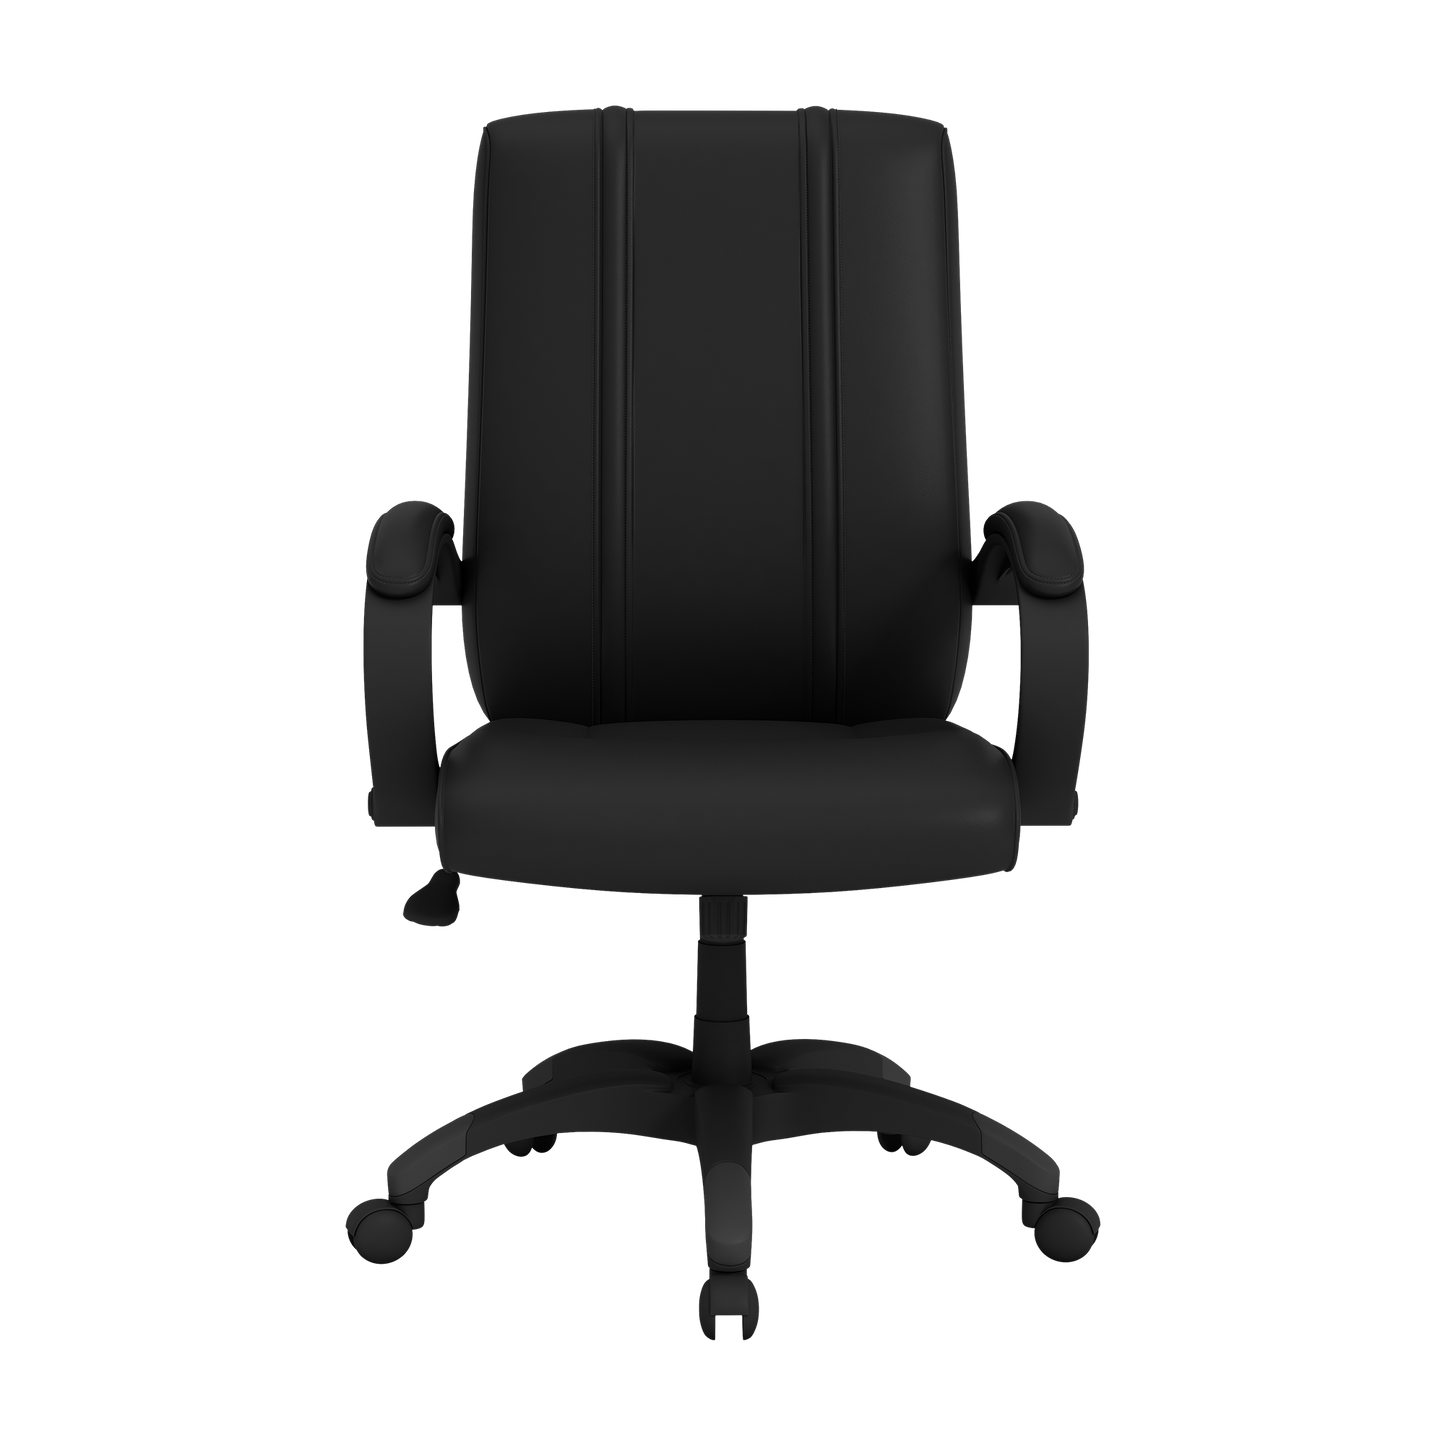 Office Chair 1000 with Rutgers Scarlet Knights Logo